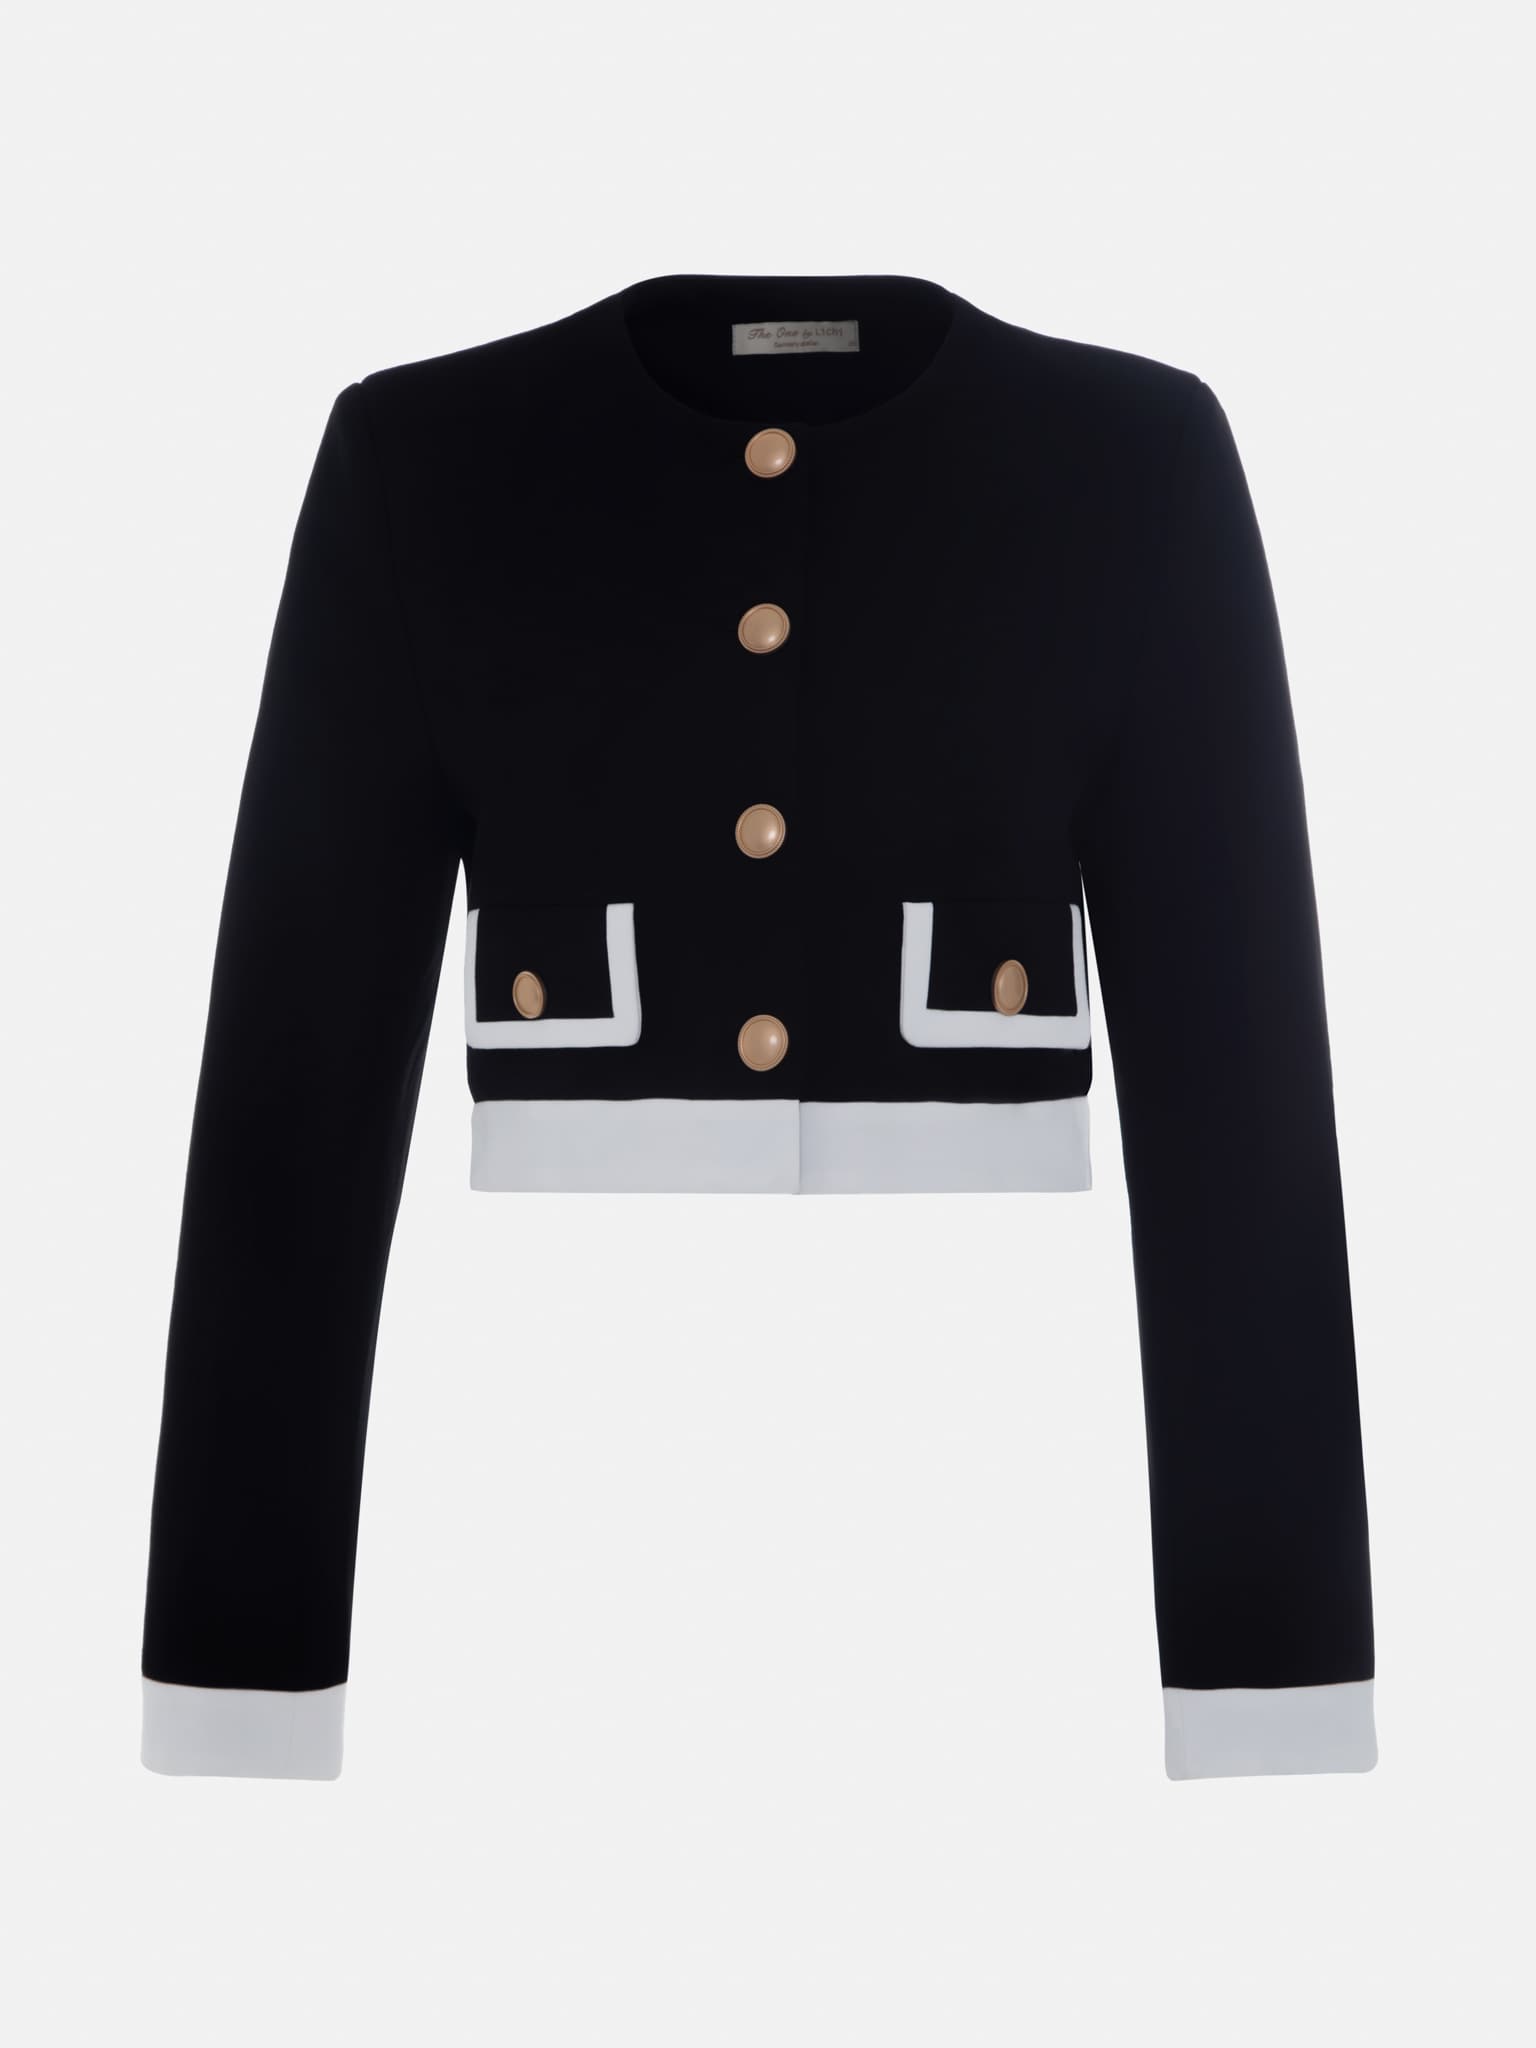 Cropped jacket with large buttons and contrasting inserts